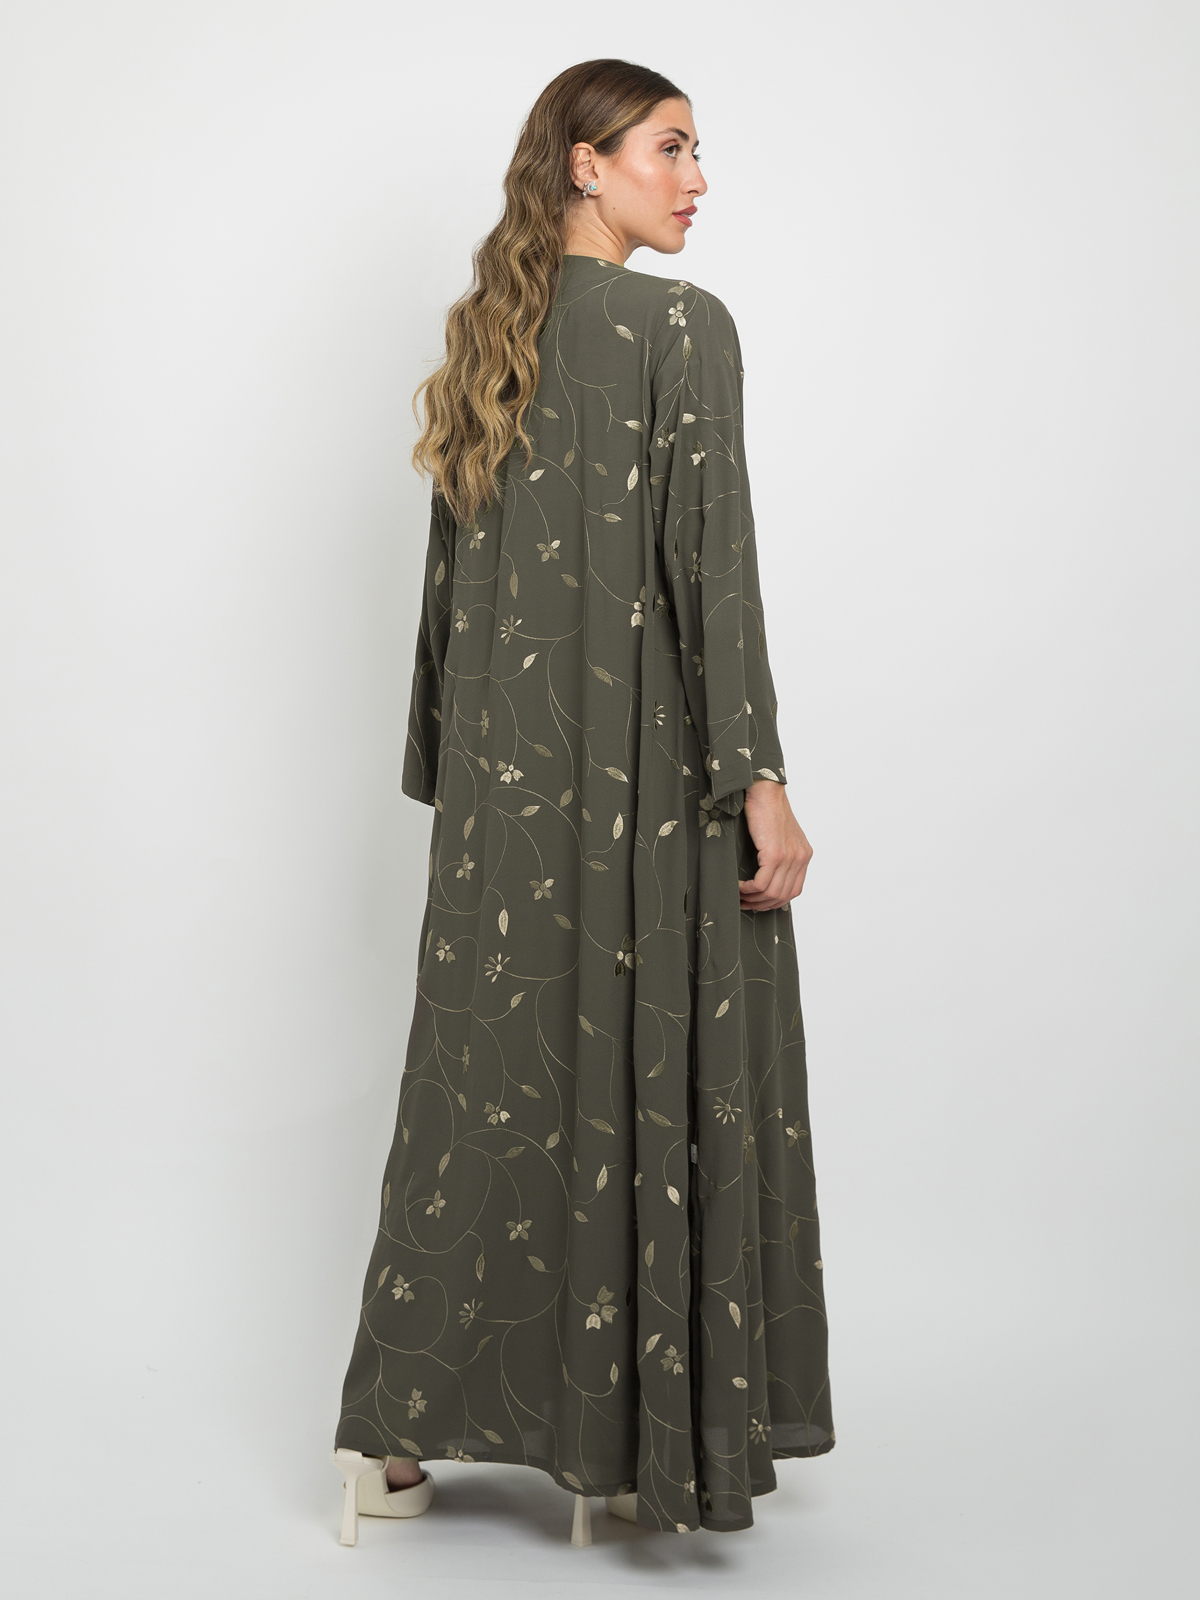 Olive - A Cut Long Open Half Cloche Abaya in Embroidered Light Fabric